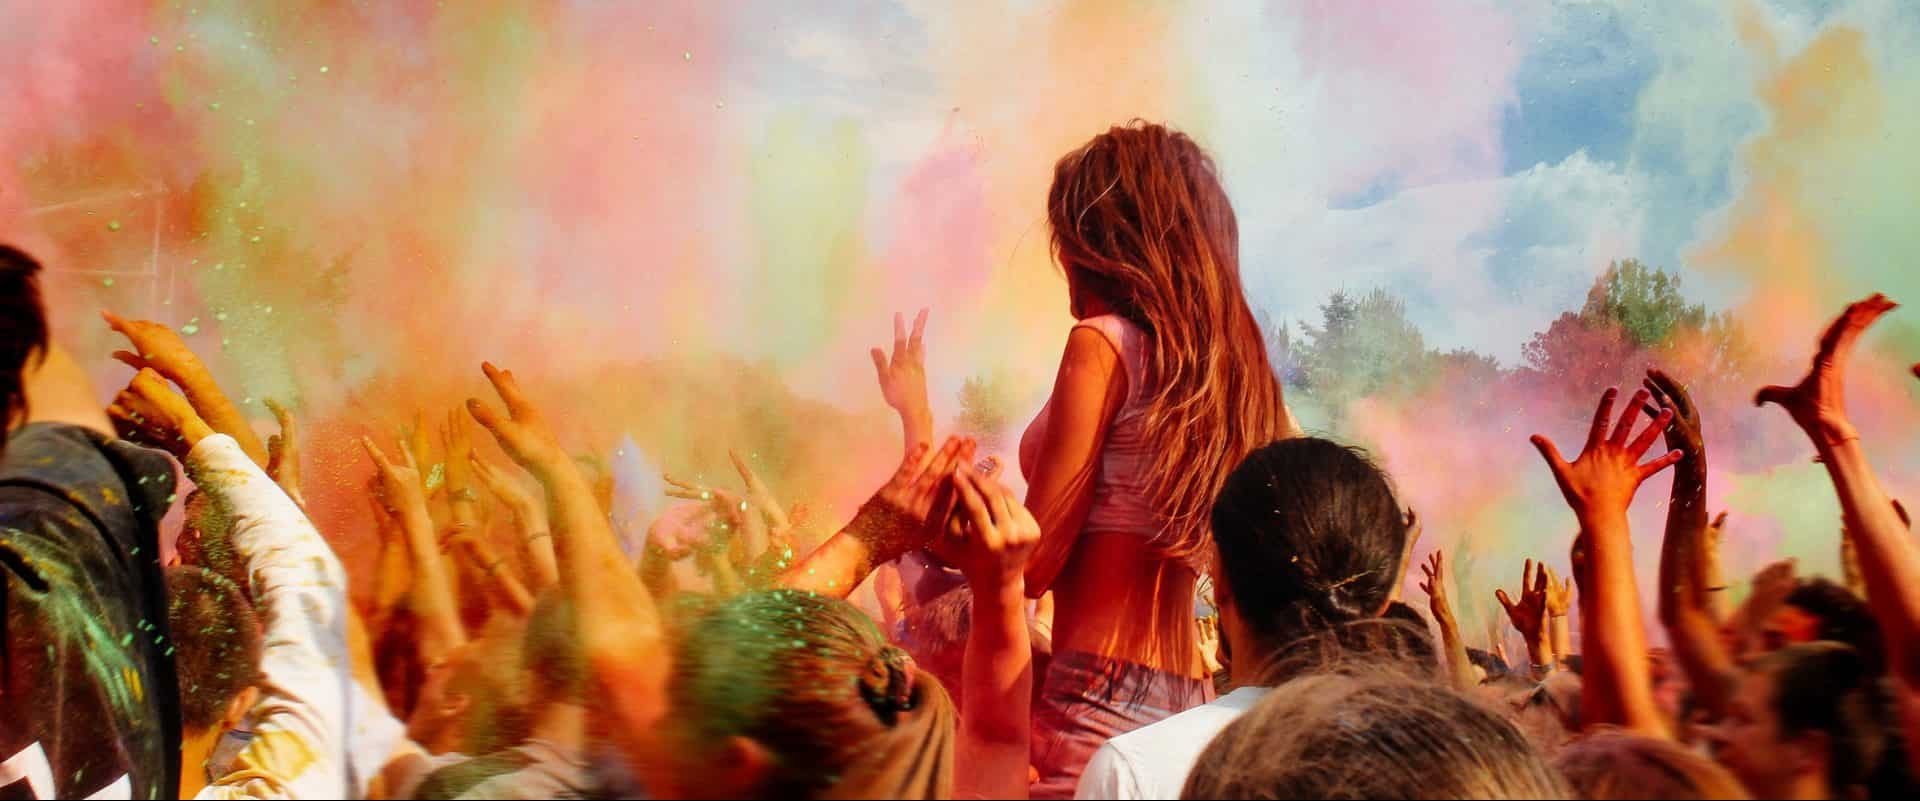 Happy People Crowd Partying Under Colorful Powder Cloud At Holi